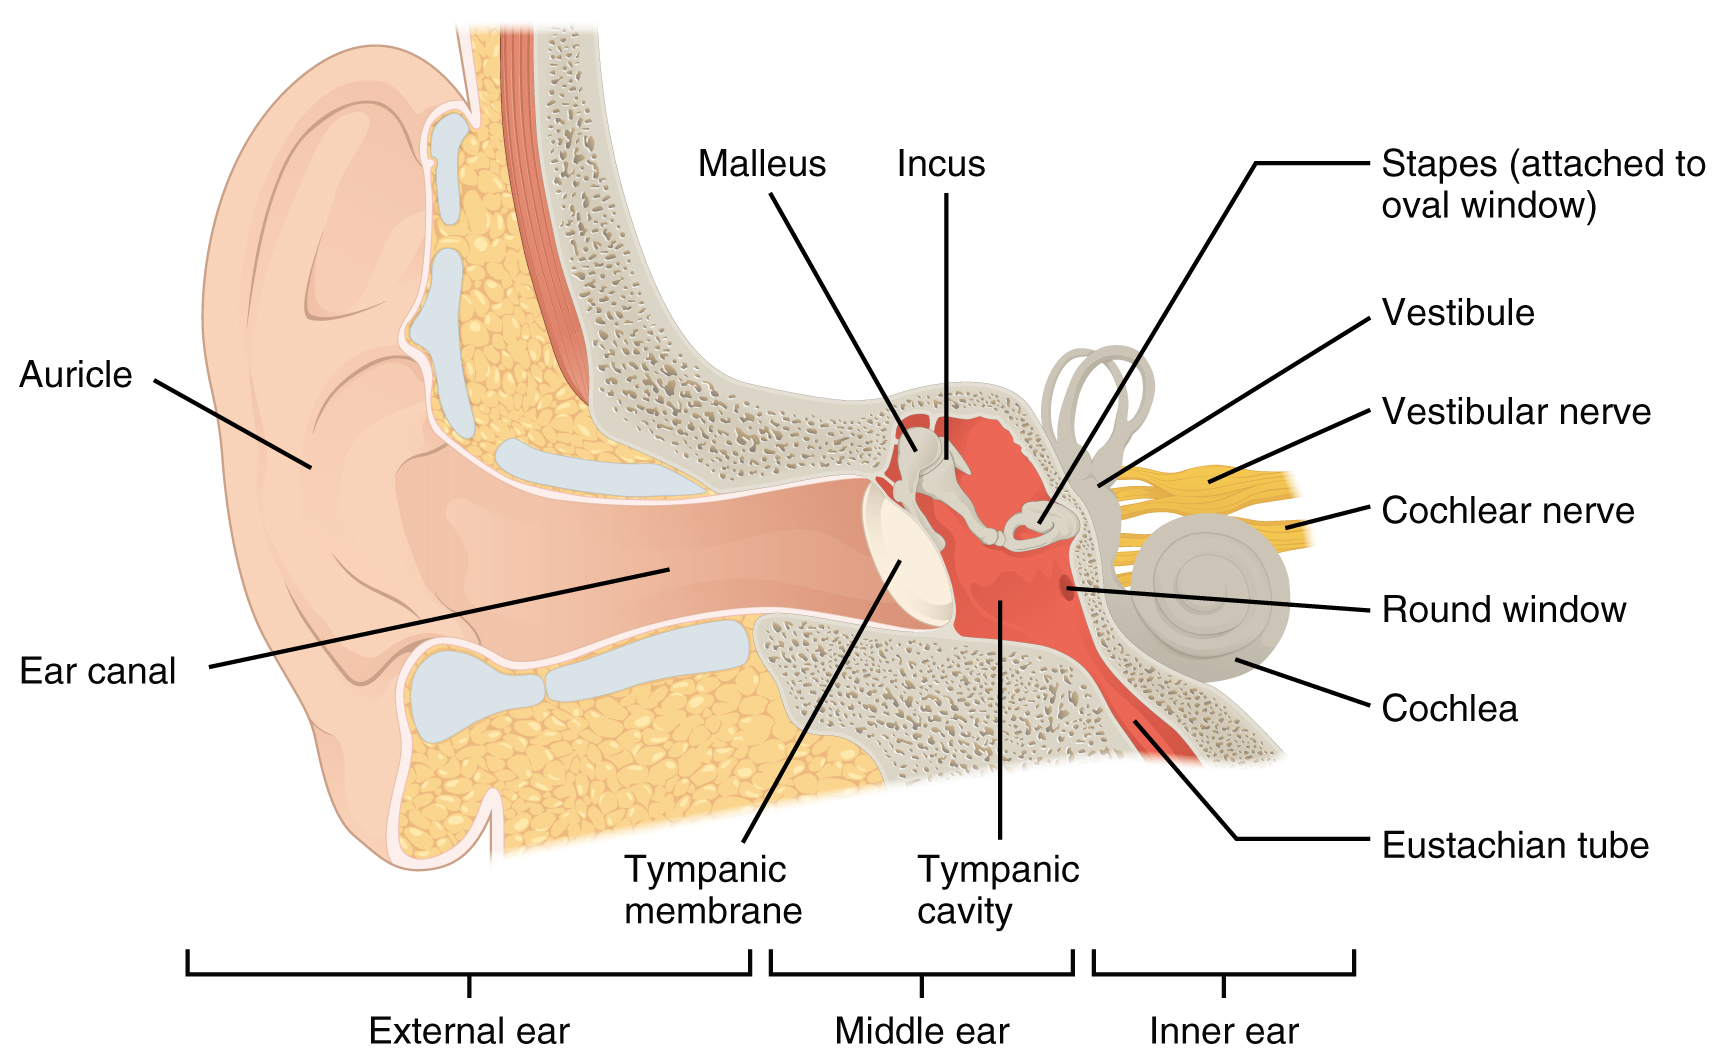 This image shows the structure of the ear with the major parts labeled. Image description available.